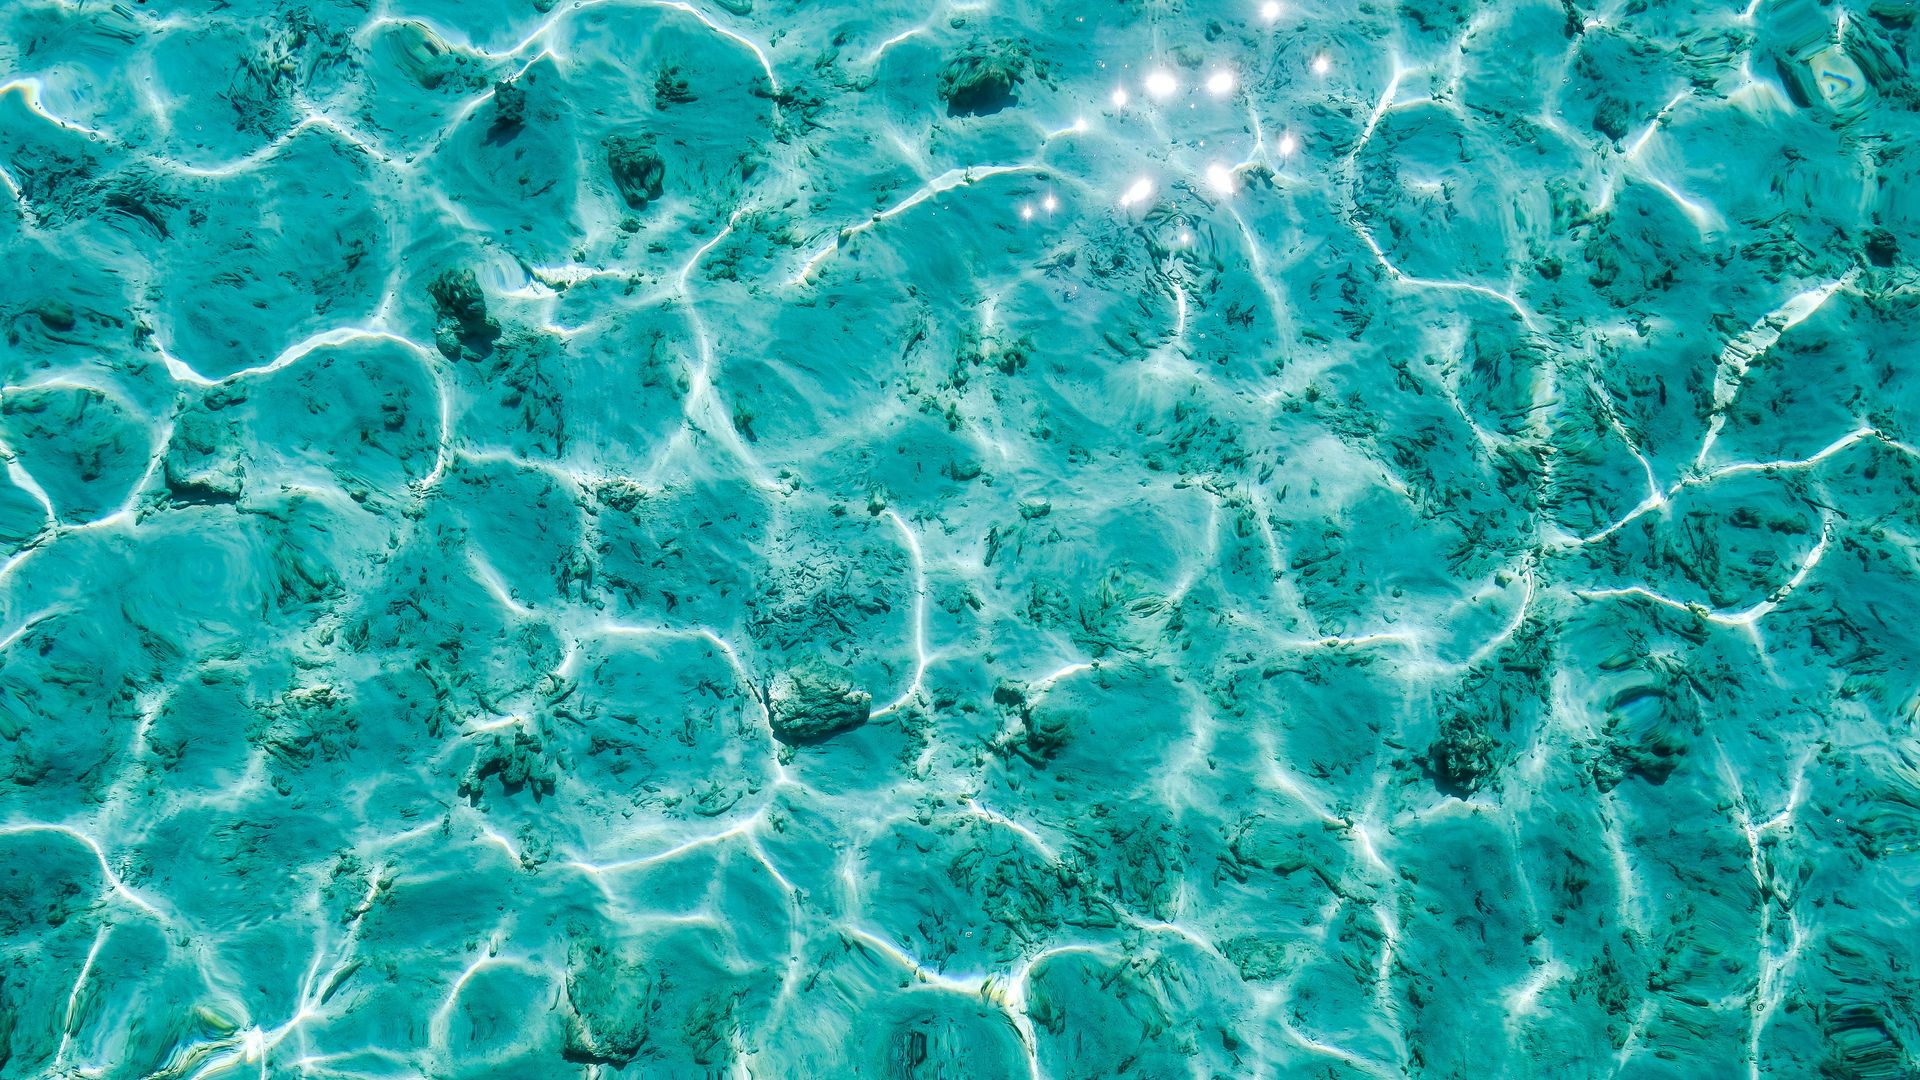 Download wallpaper 1920x1080 water, turquoise, glare, texture full hd,  hdtv, fhd, 1080p hd background